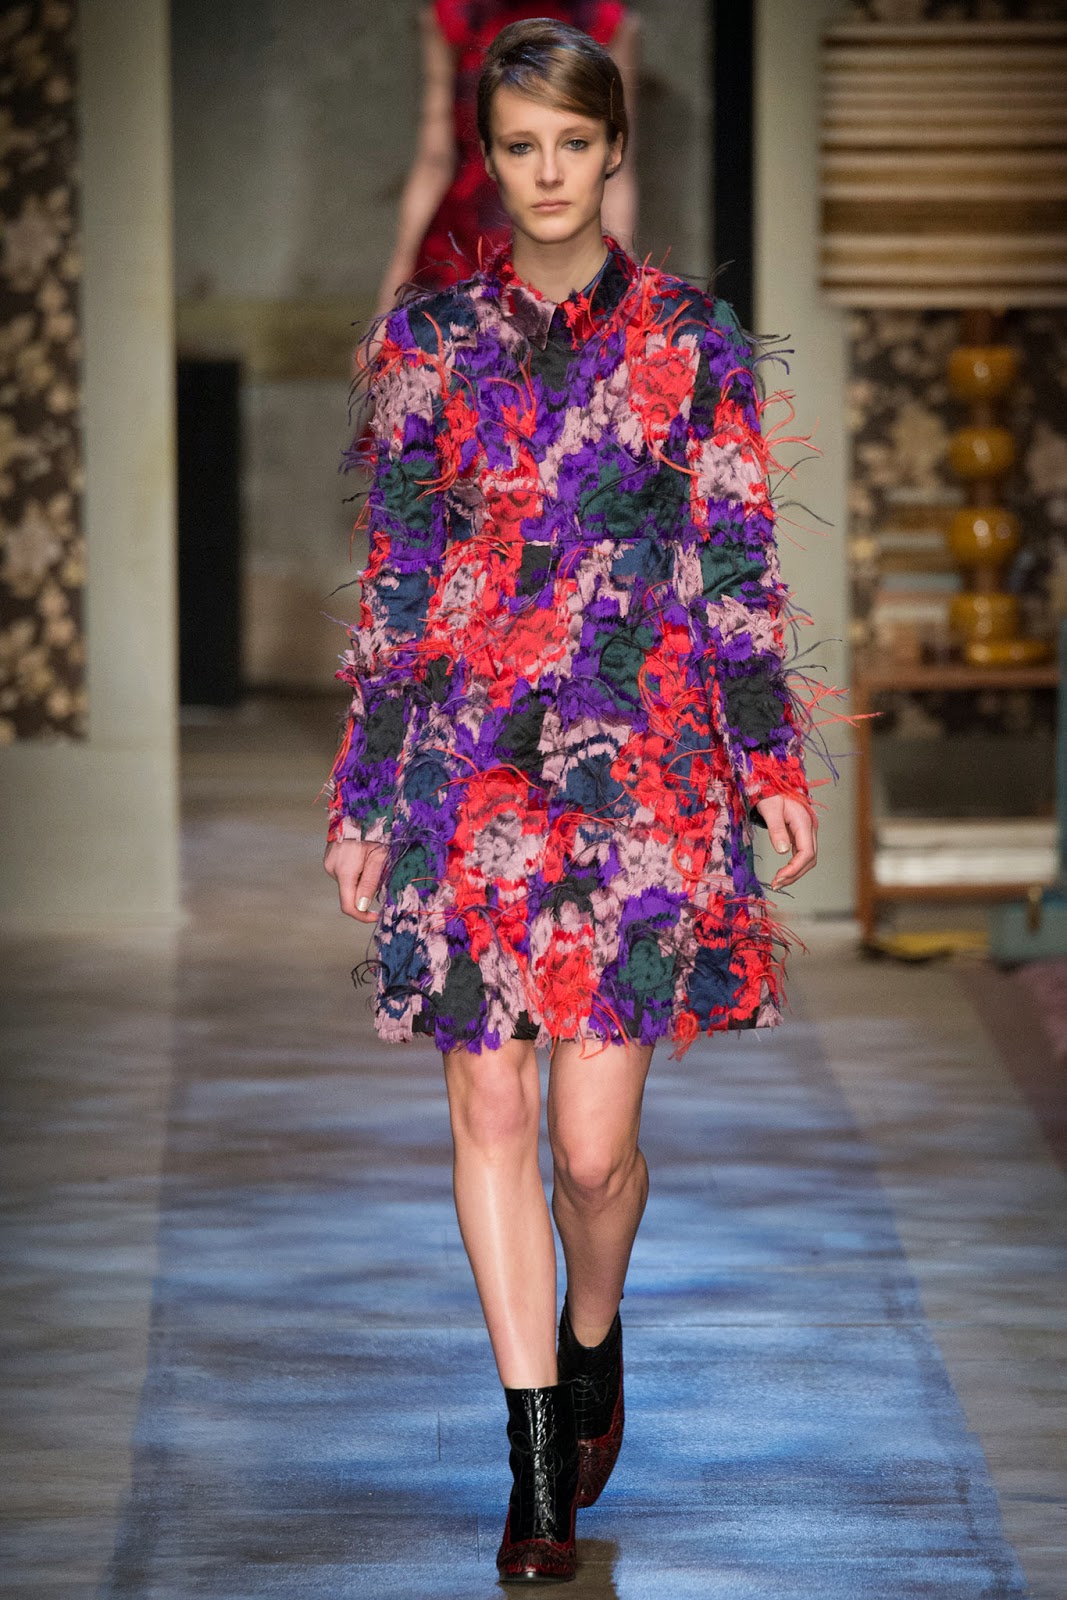 A day in the life of... Me: Erdem Fall 2015 Ready-to-Wear #MFW